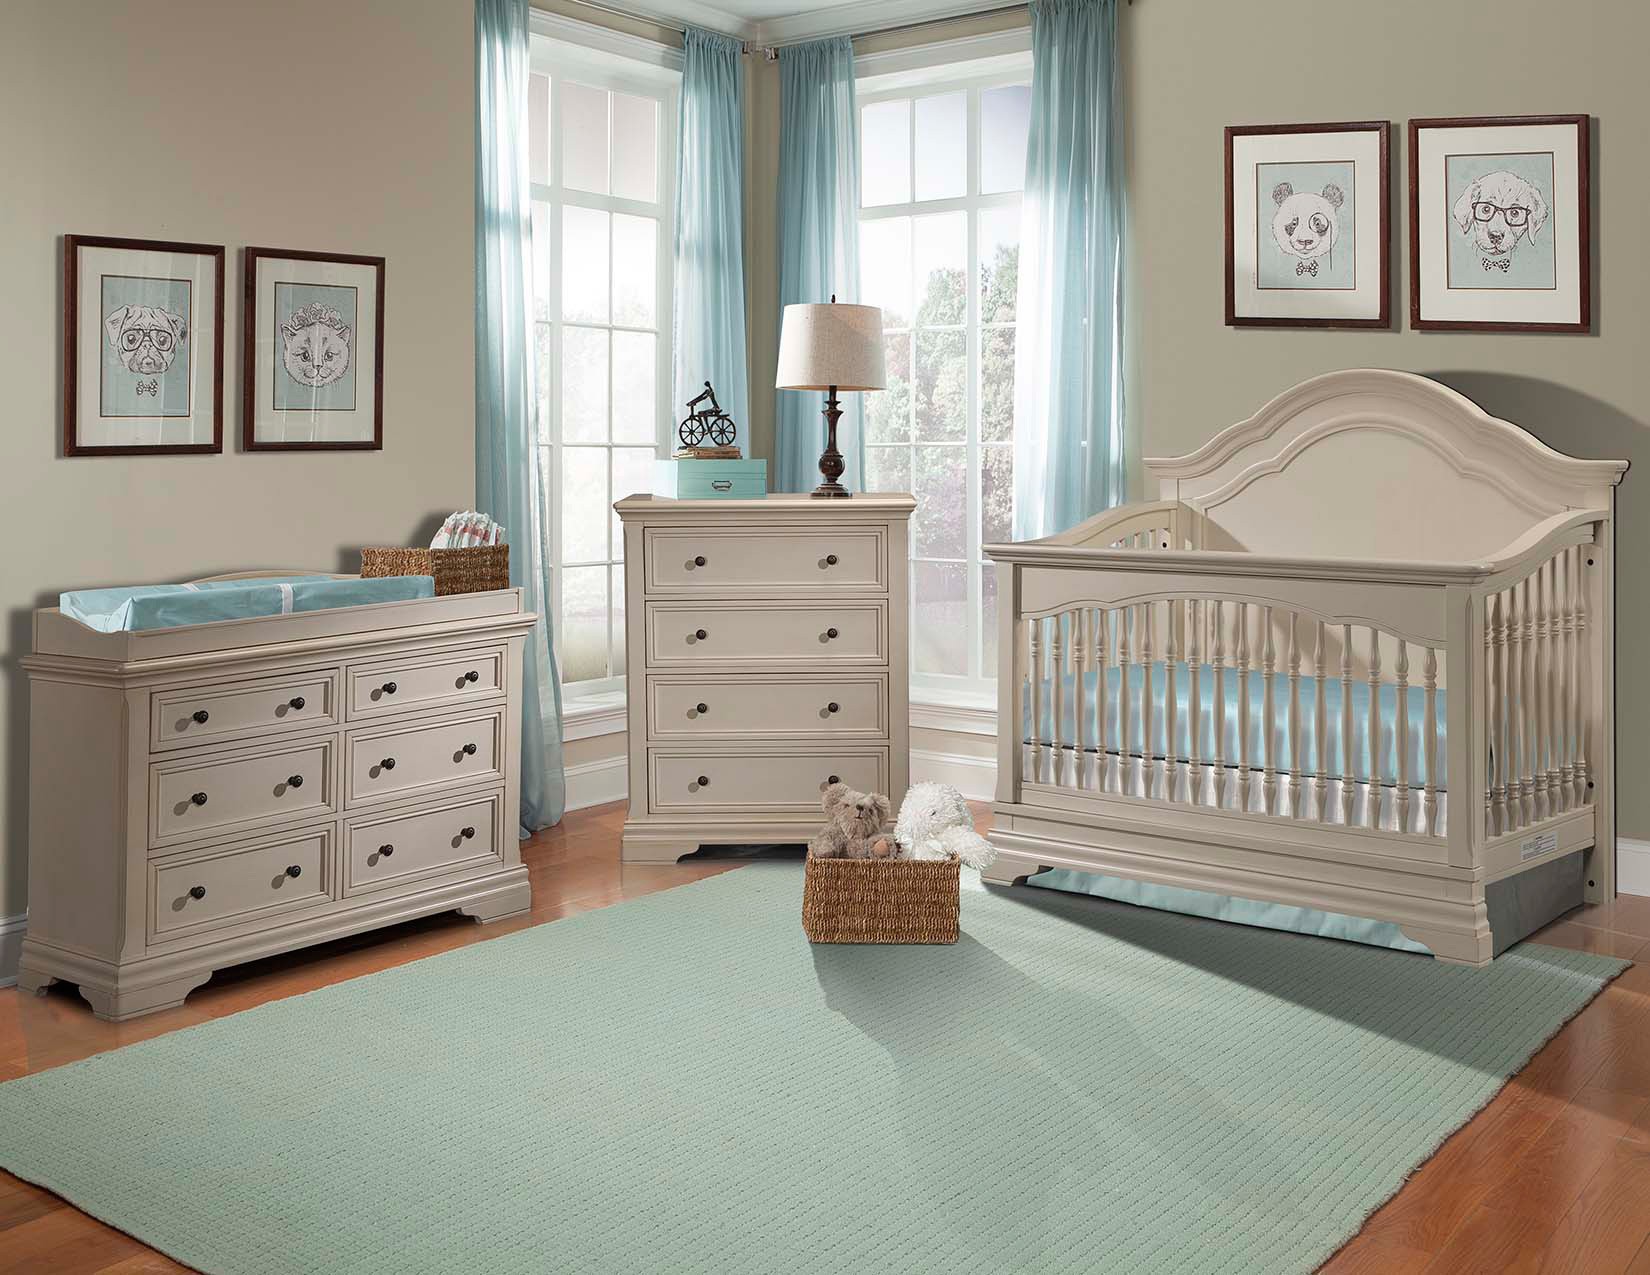 Baby furniture sets are cute